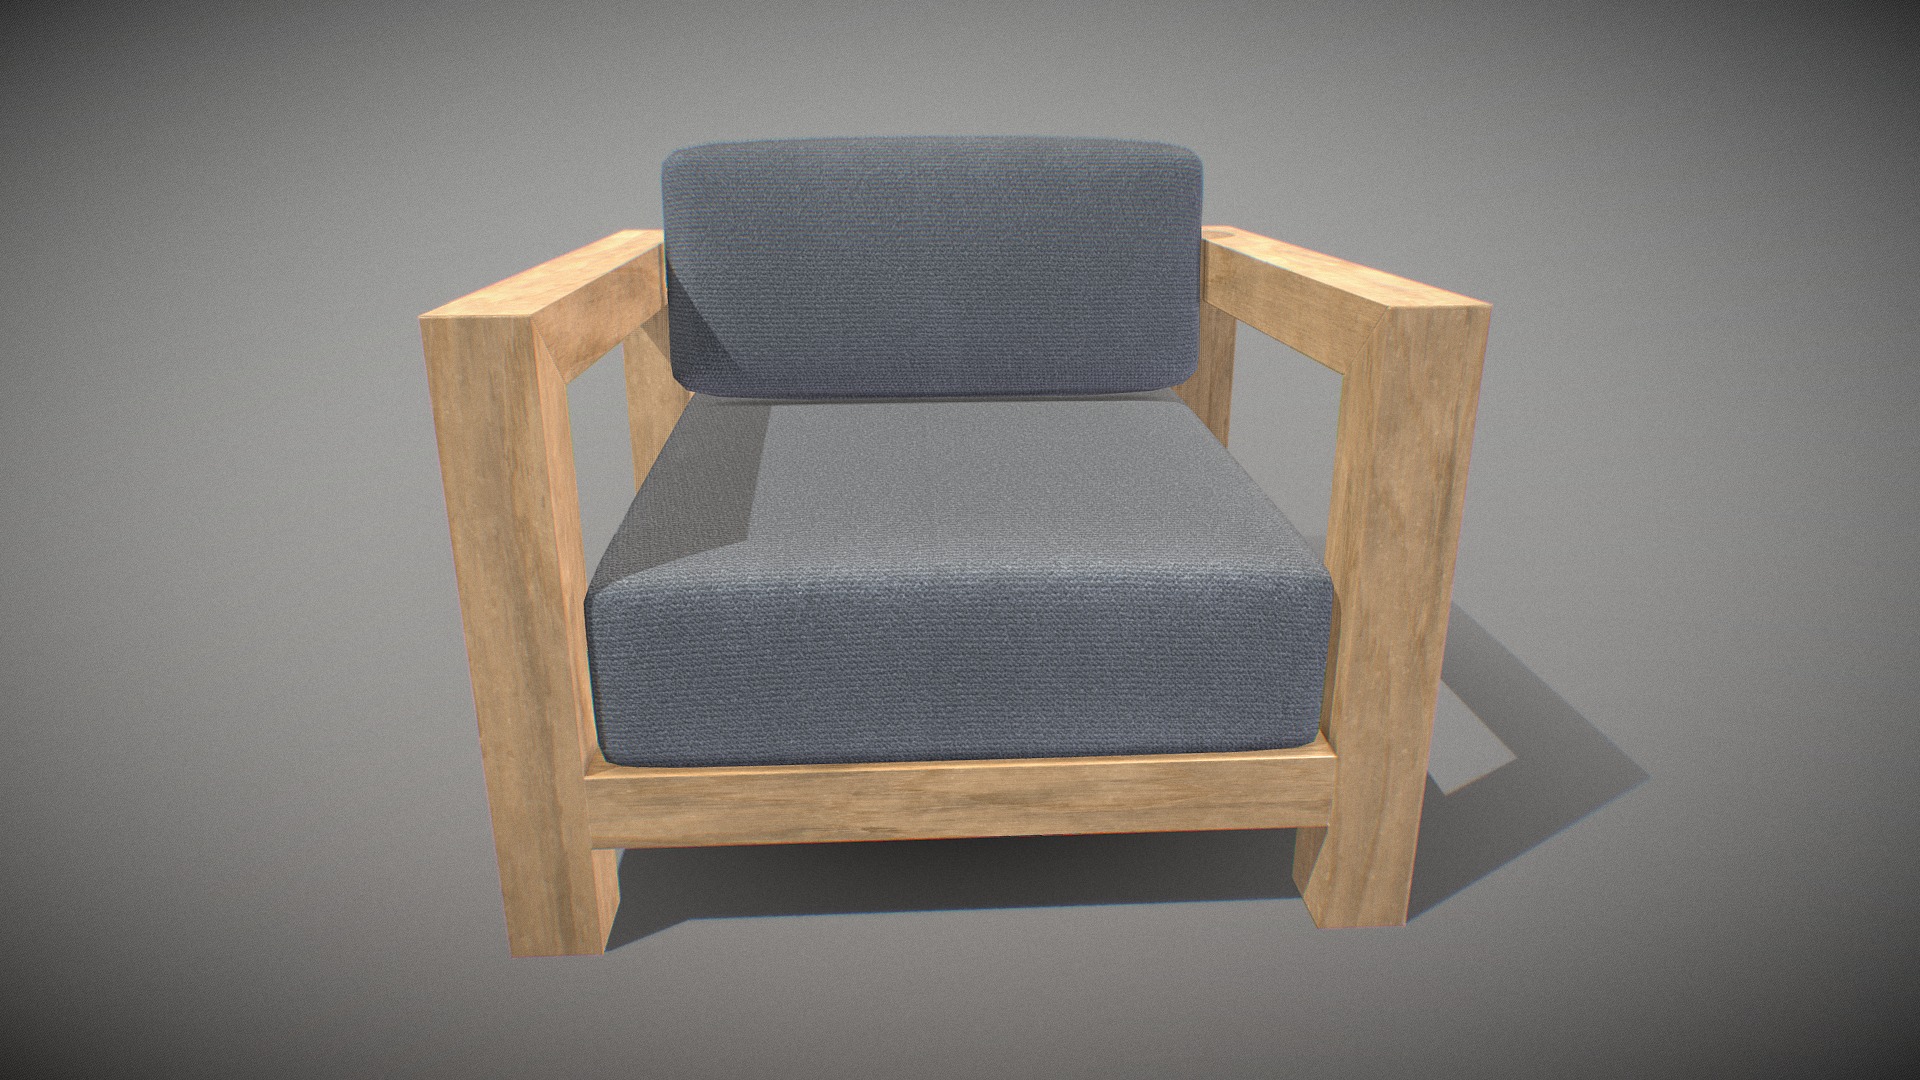 3D model Veroda Angle Sofa 01 - This is a 3D model of the Veroda Angle Sofa 01. The 3D model is about a chair on a table.